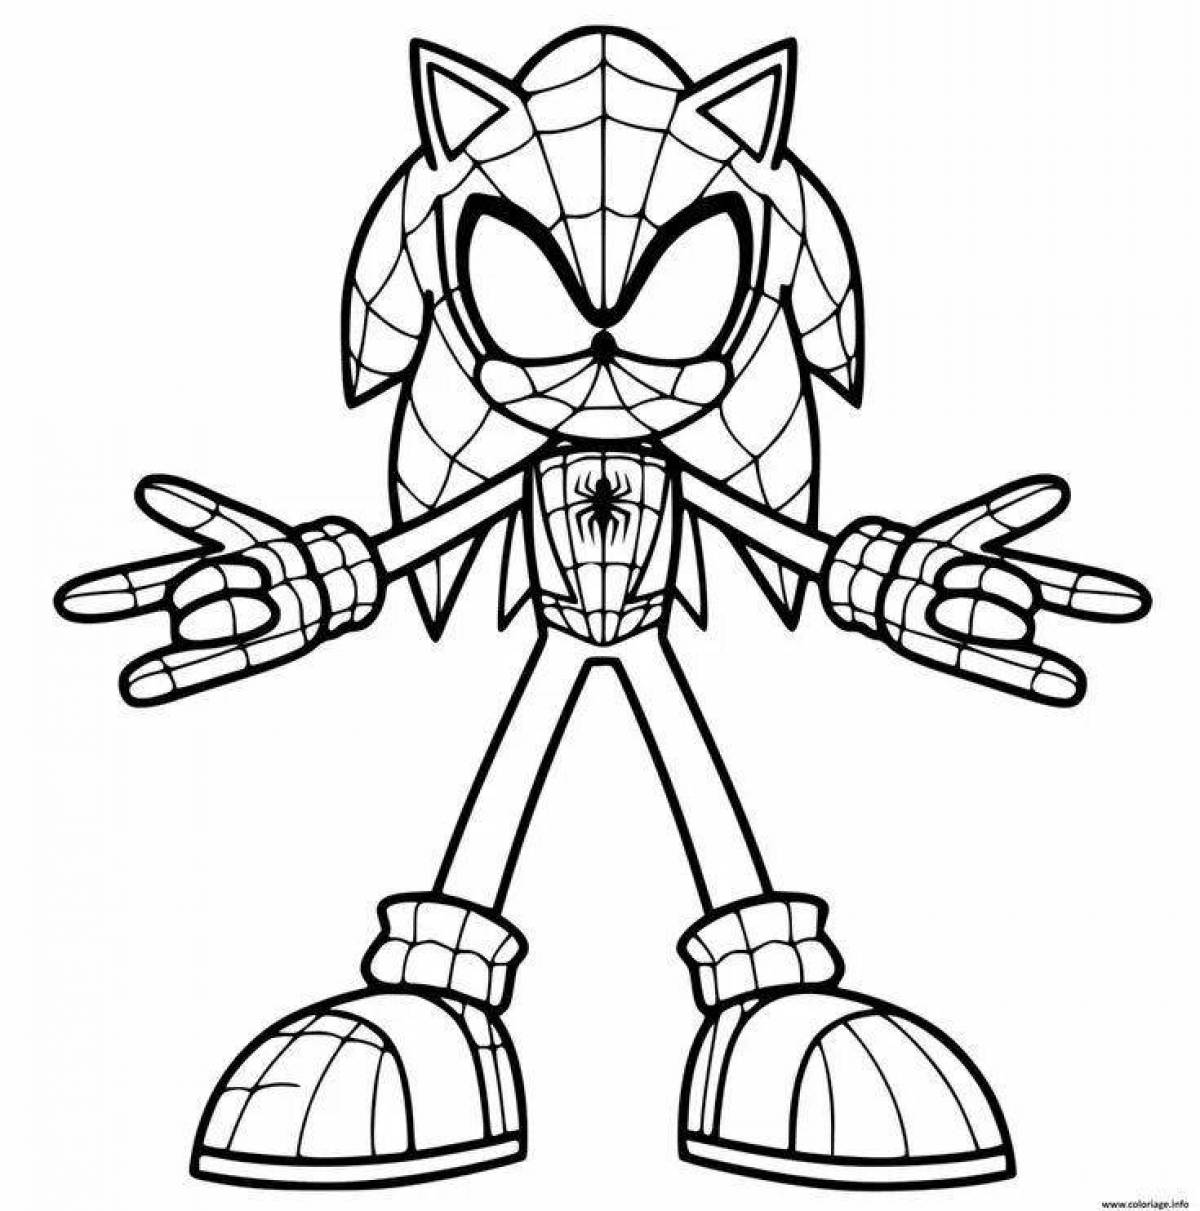 Dazzling sonic egze coloring page